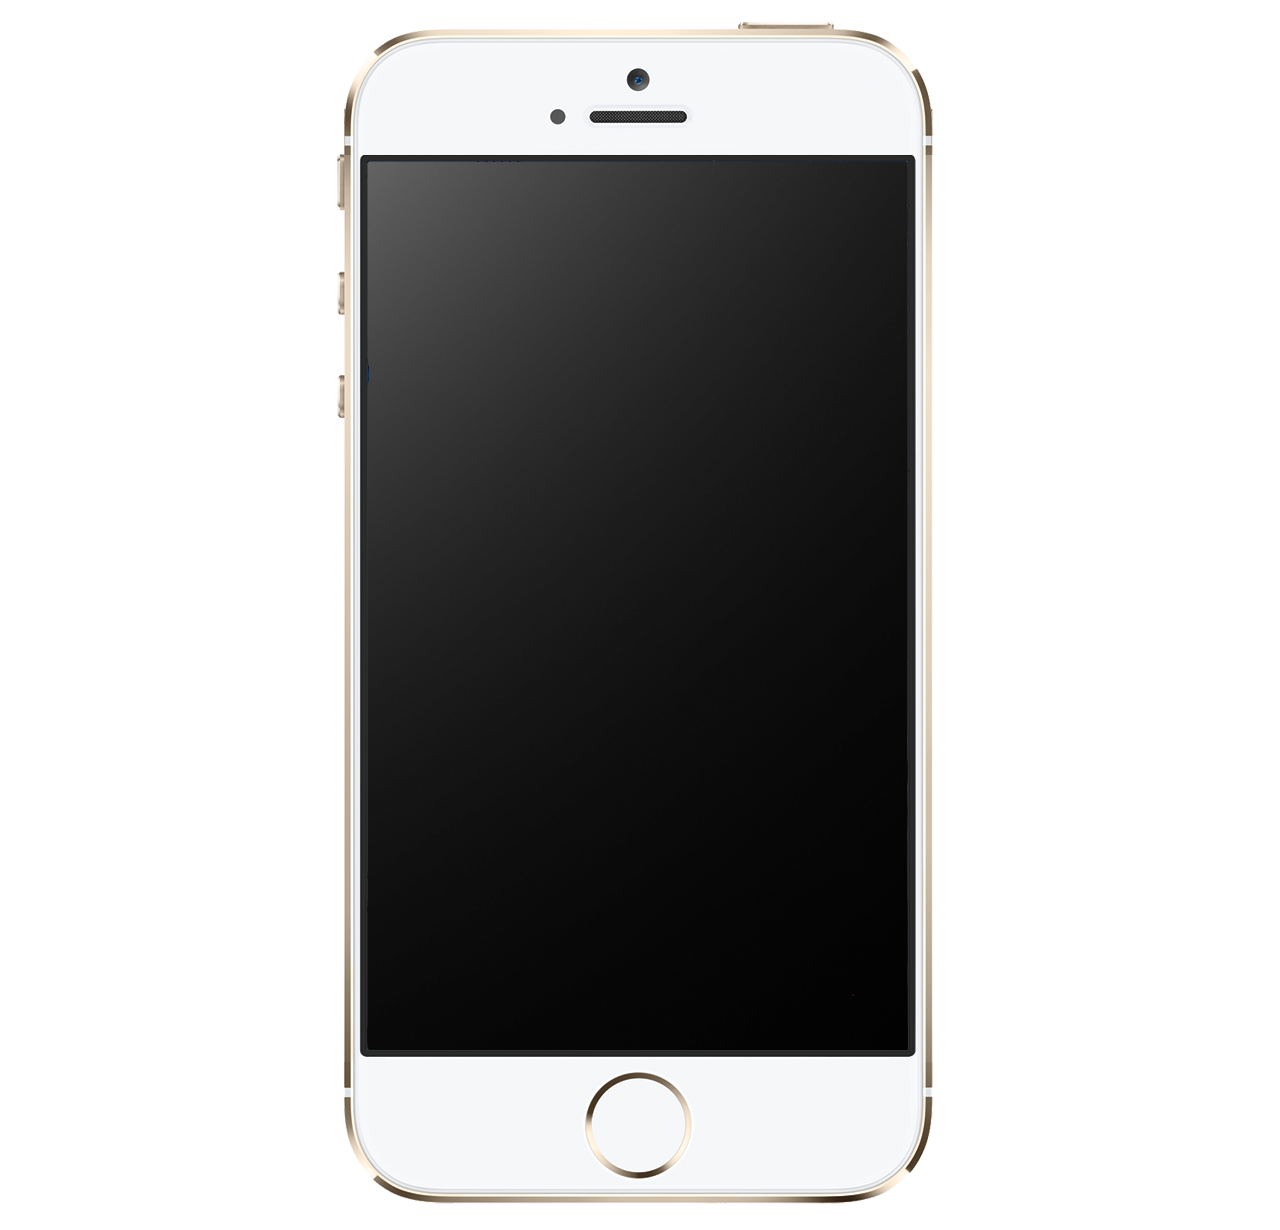 Apple png images free. Cellphone clipart iphone 6